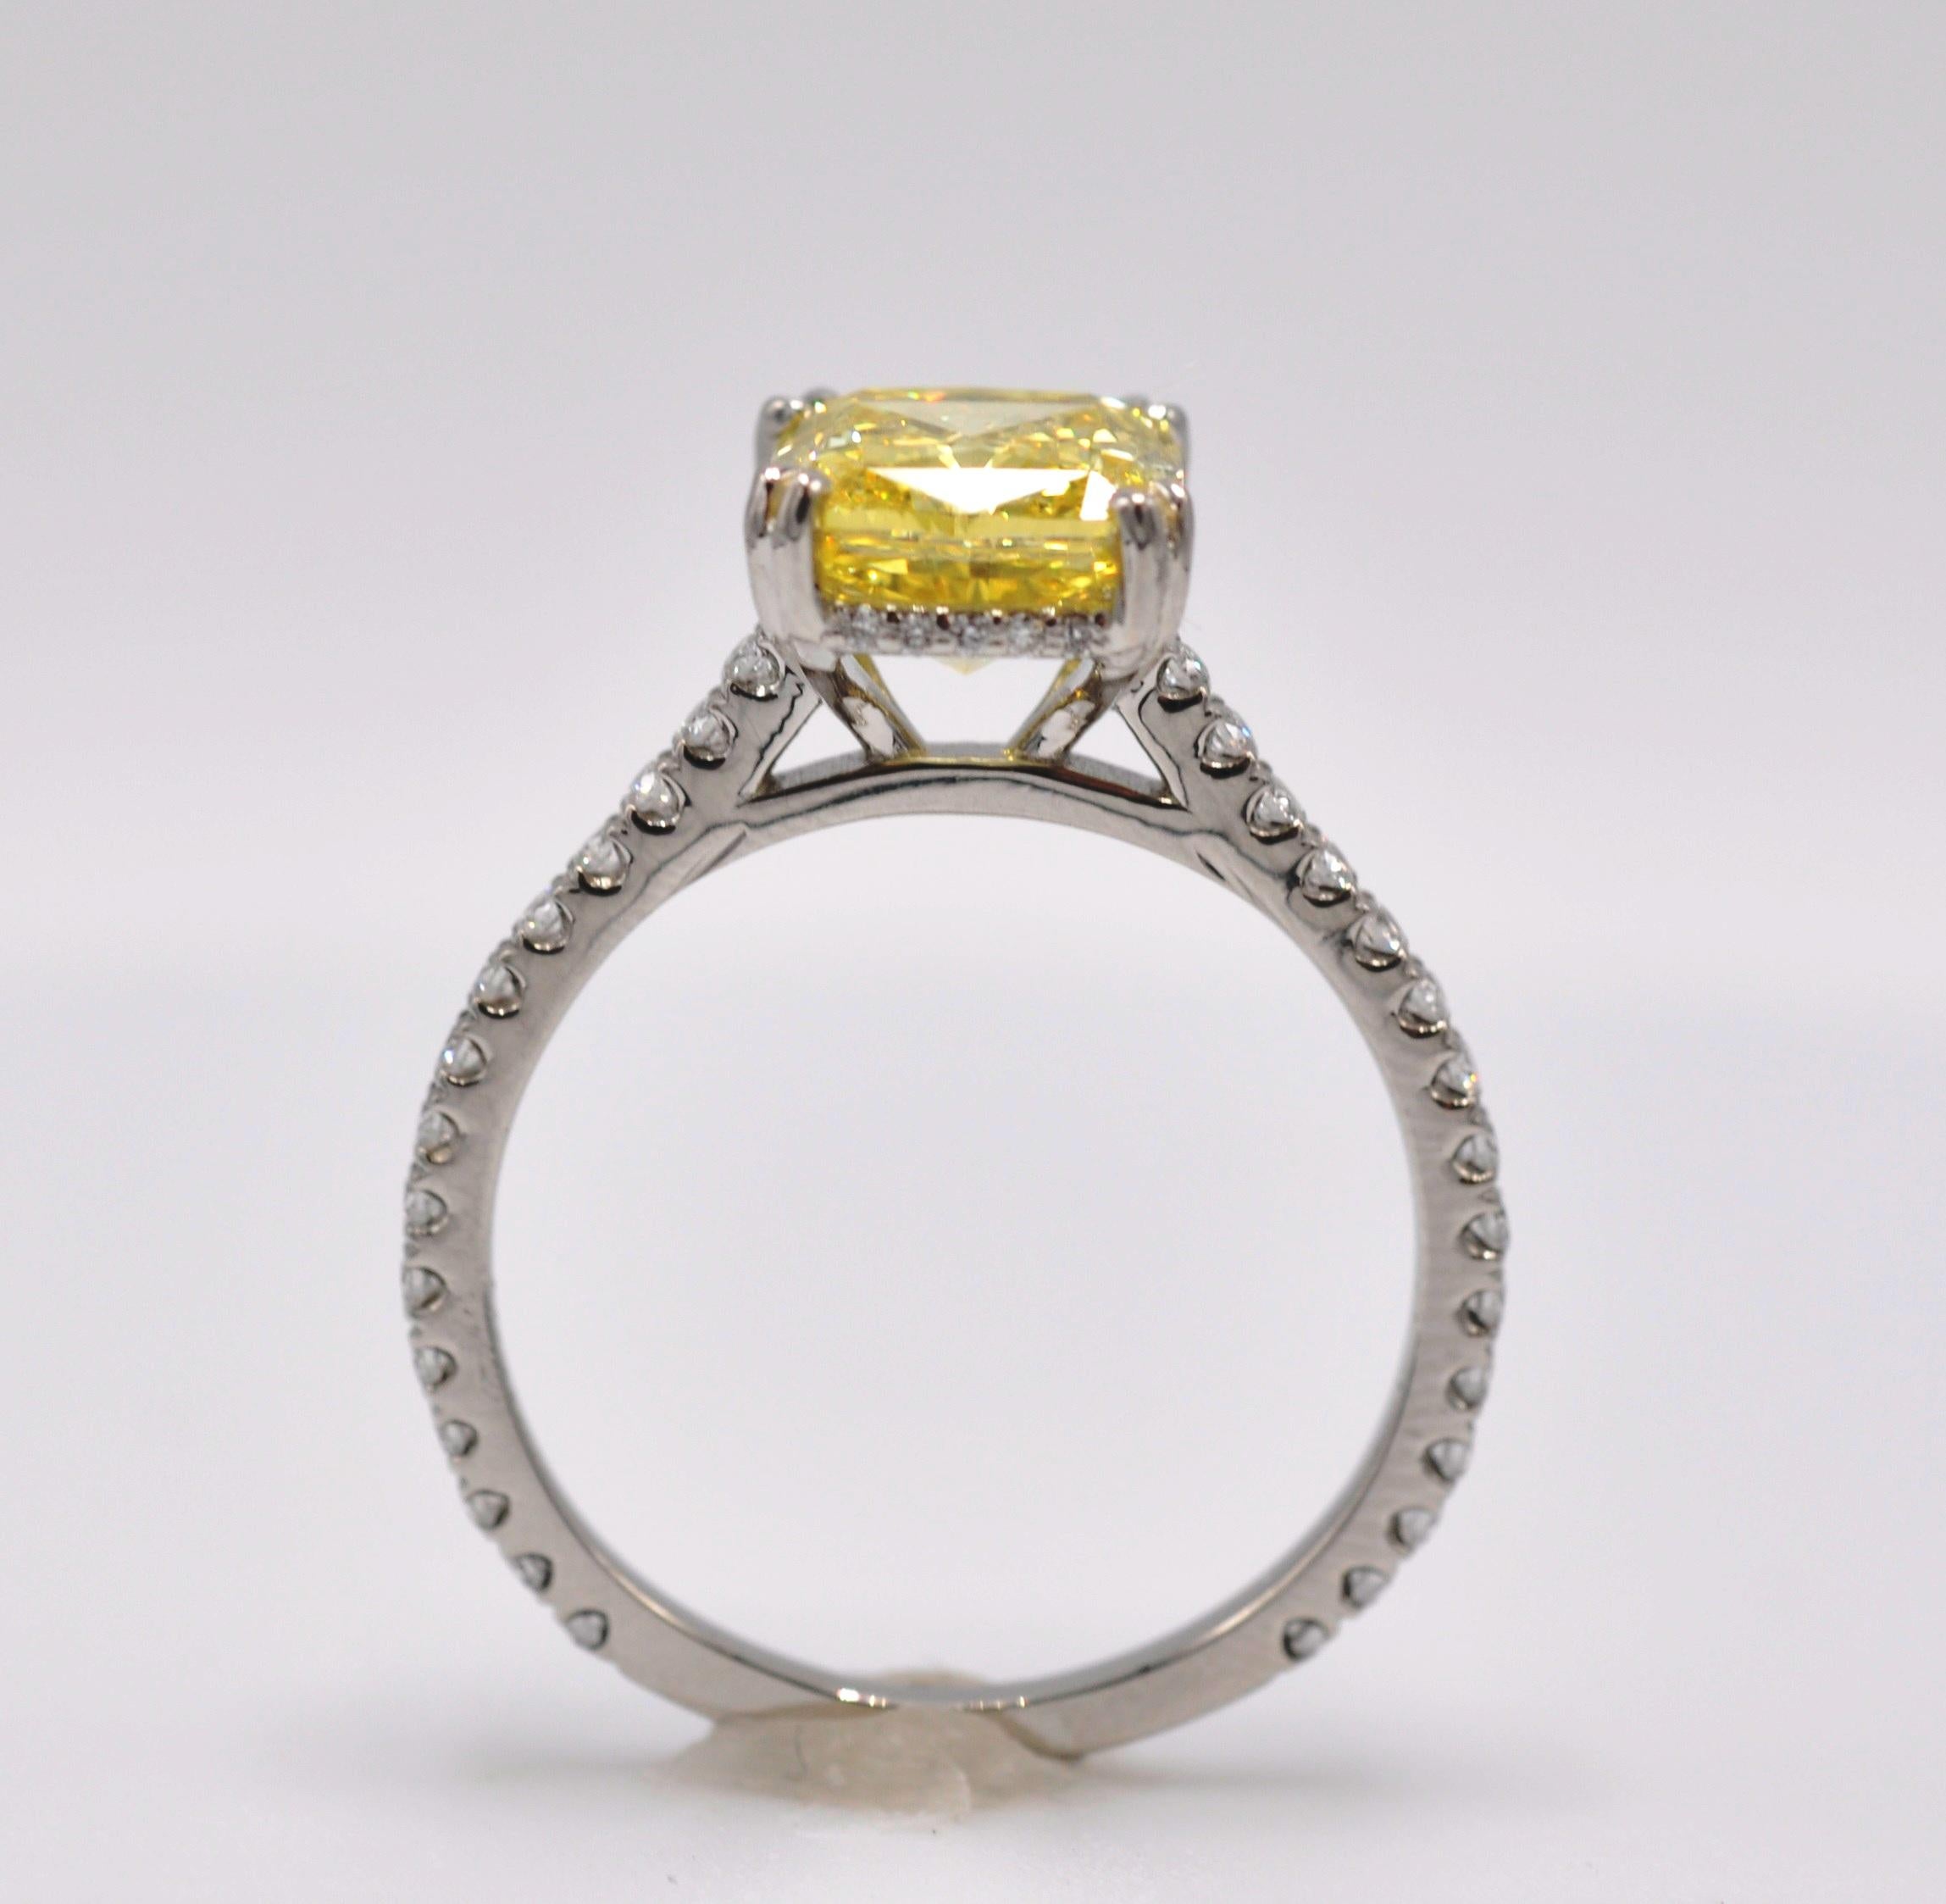 3.02ctw Fancy Vivid Yellow Diamond Platinum Engagement Ring. GIA certified center stone.  3.02 CTW Center Stone set in Platinum and Diamond Setting  which extends 3V4 way around the ring.   Brand New, never worn.  Size 7.25 and can be sized to fit. 